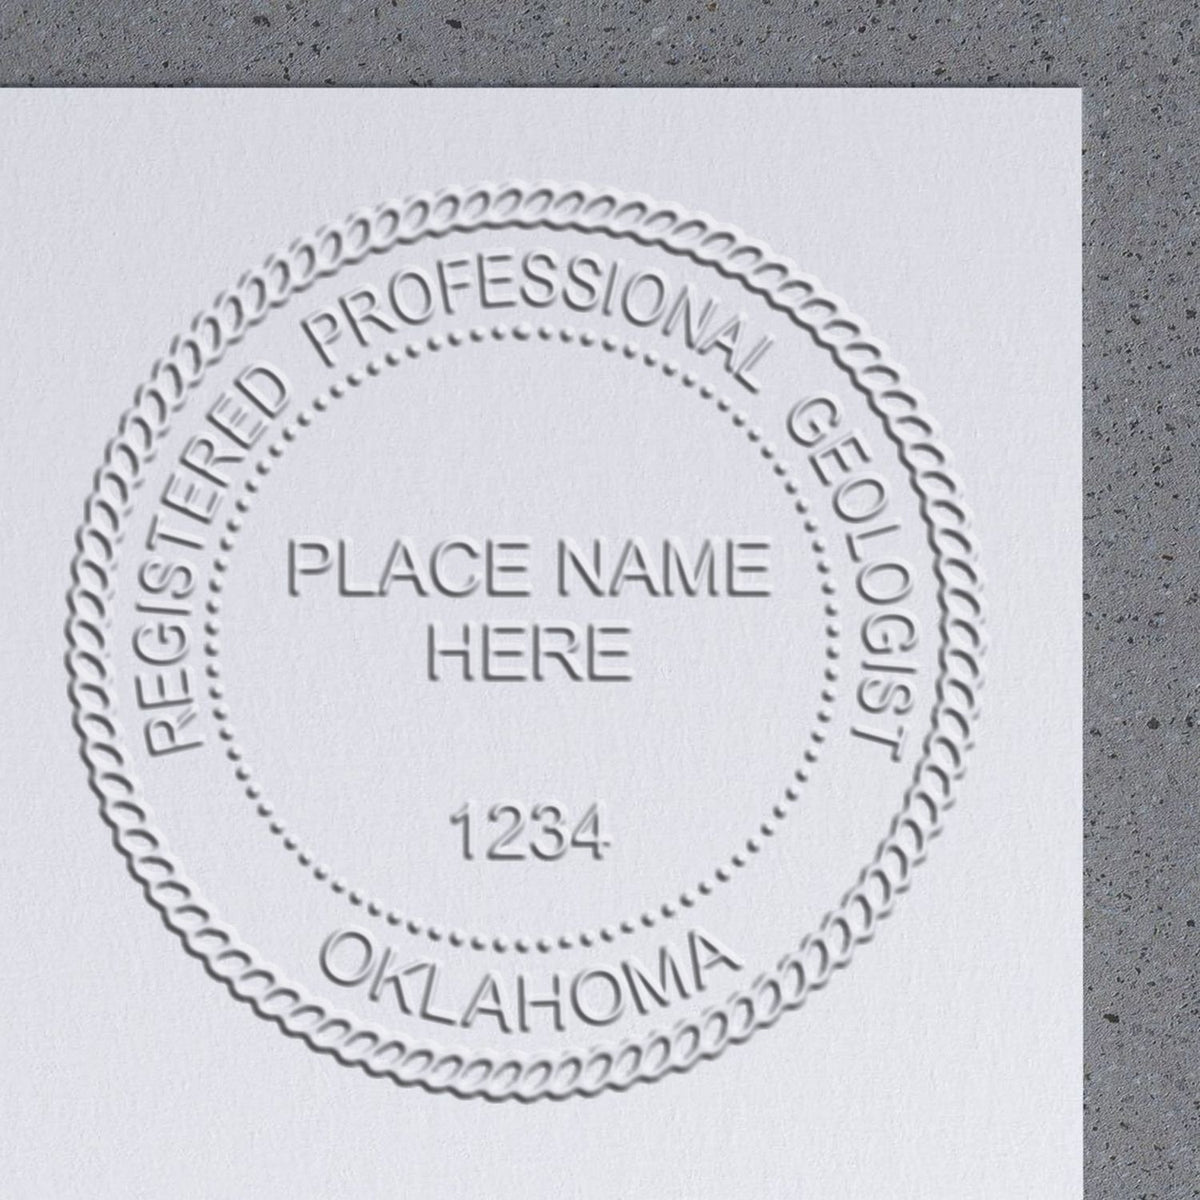 An in use photo of the Soft Oklahoma Professional Geologist Seal showing a sample imprint on a cardstock